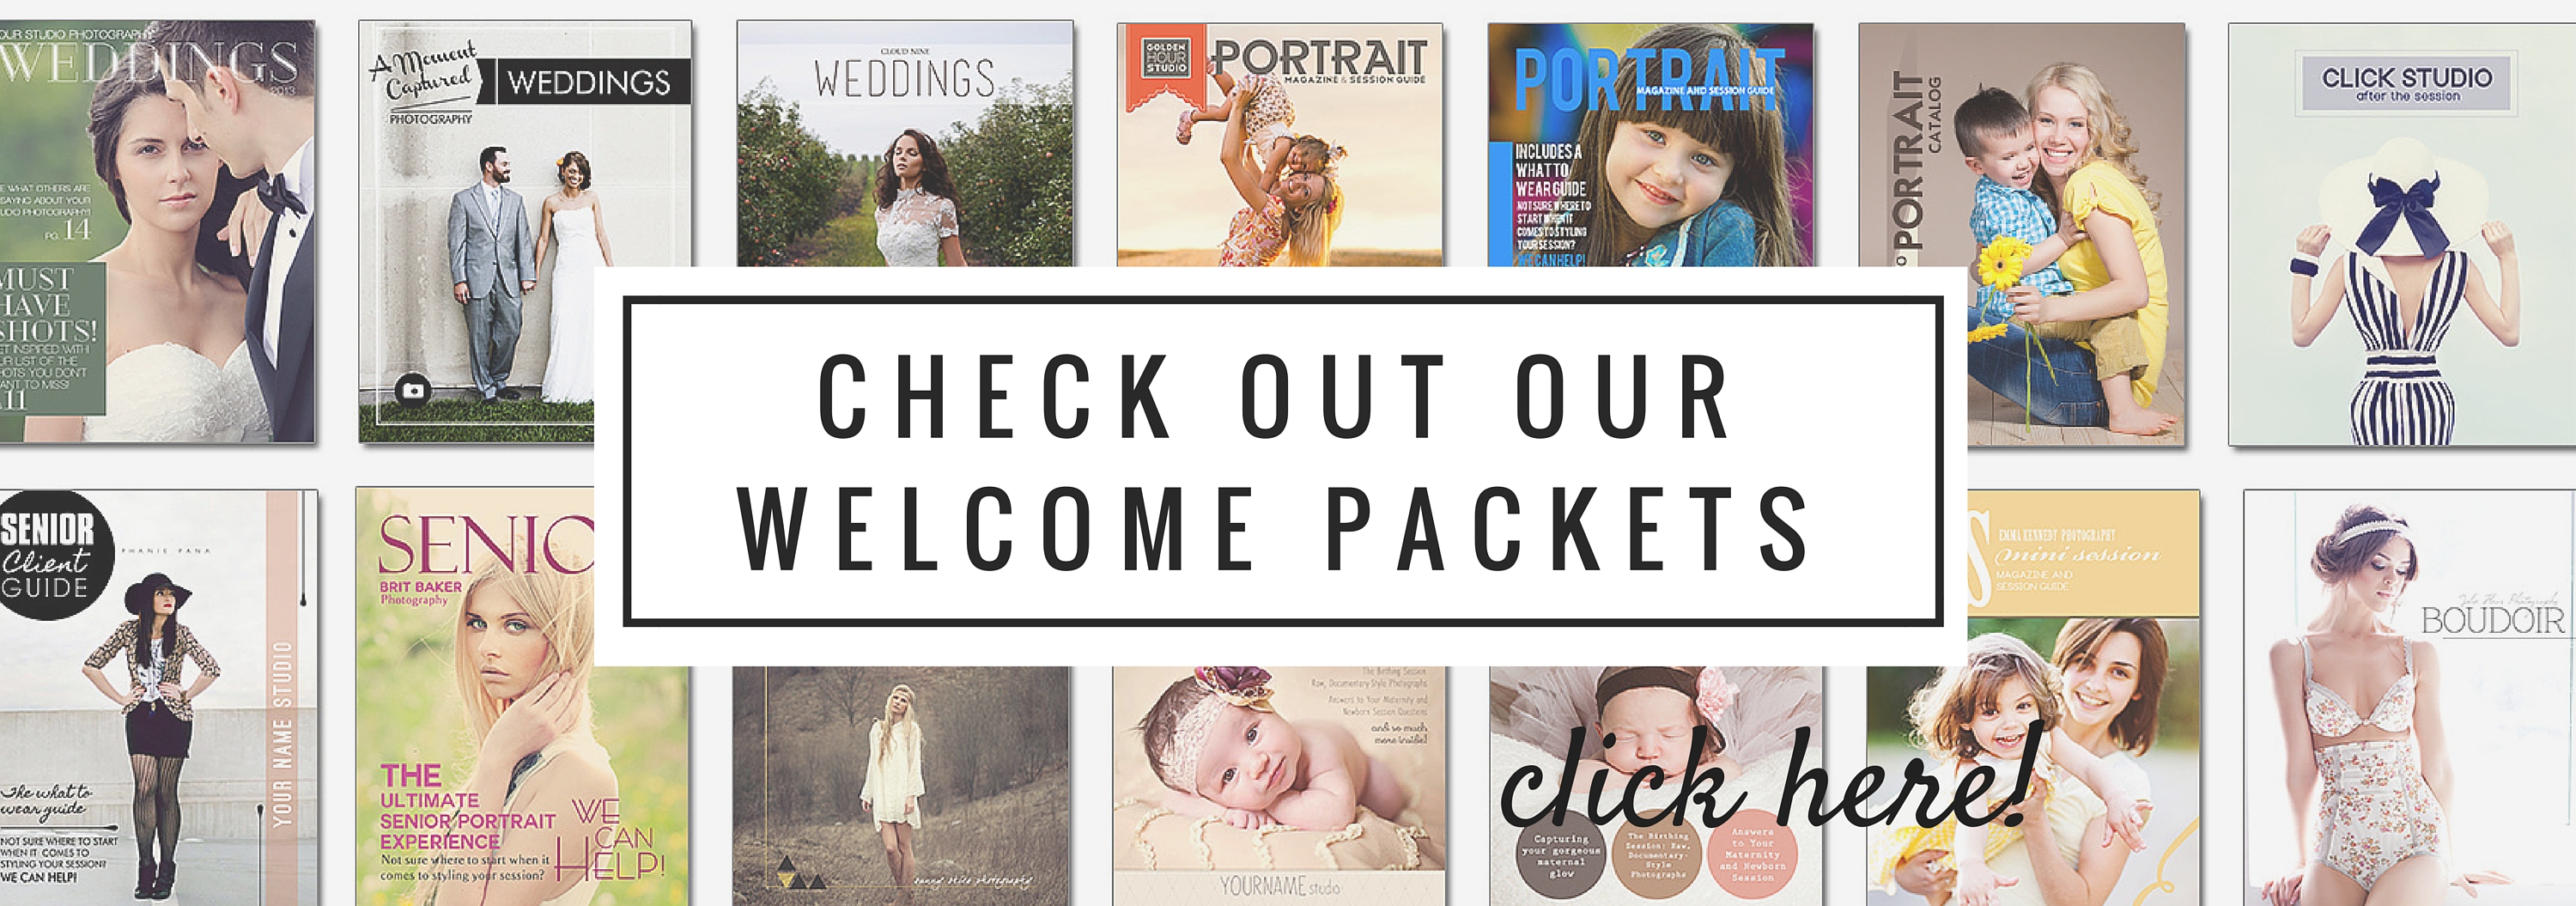 click here to check outout welcome packets